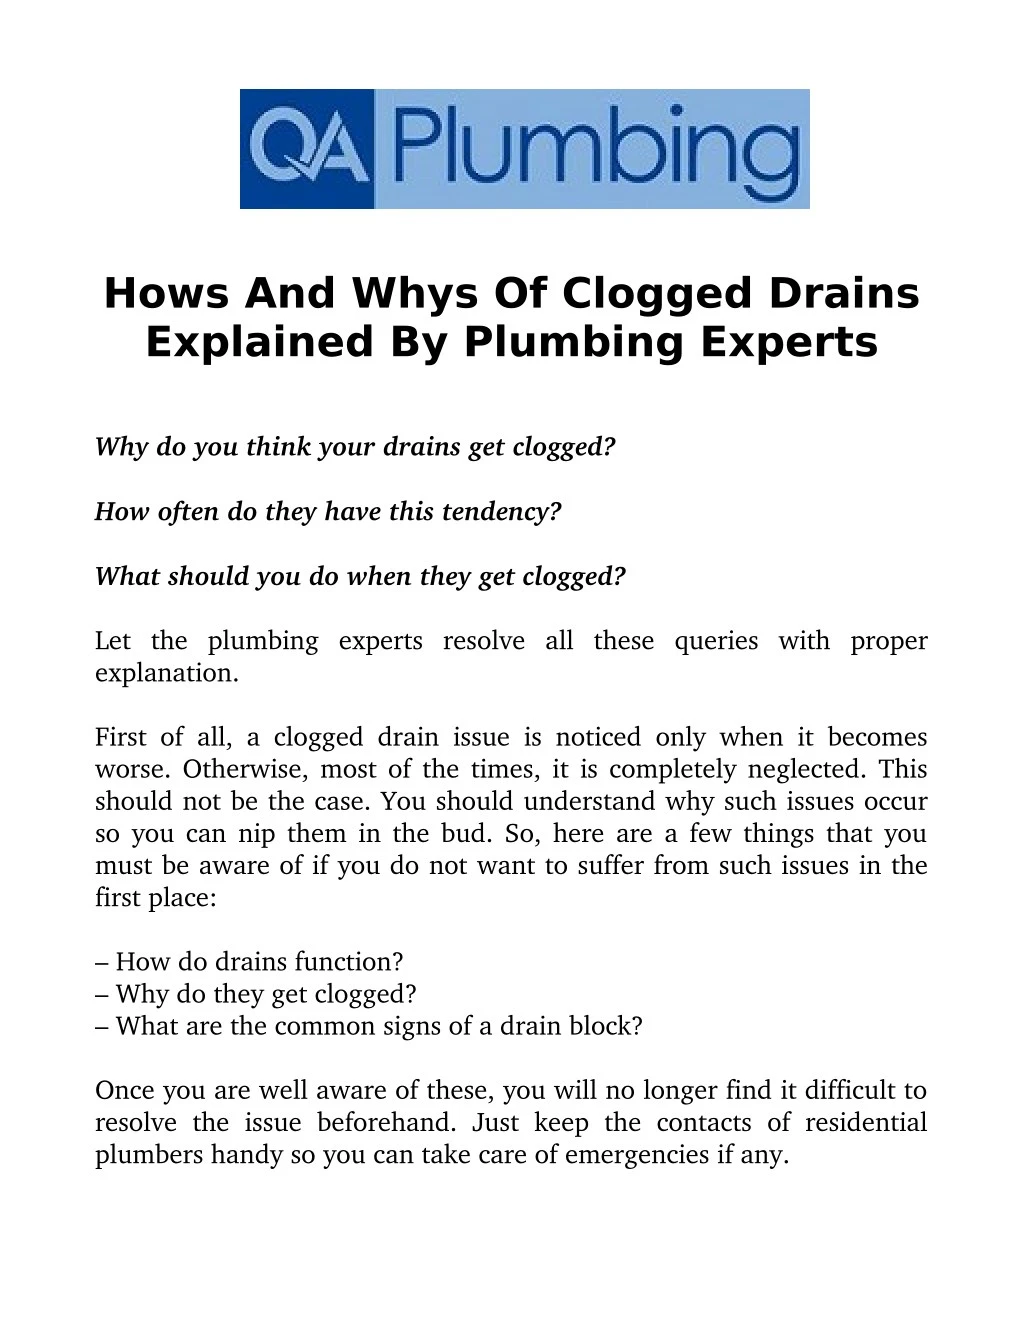 hows and whys of clogged drains explained